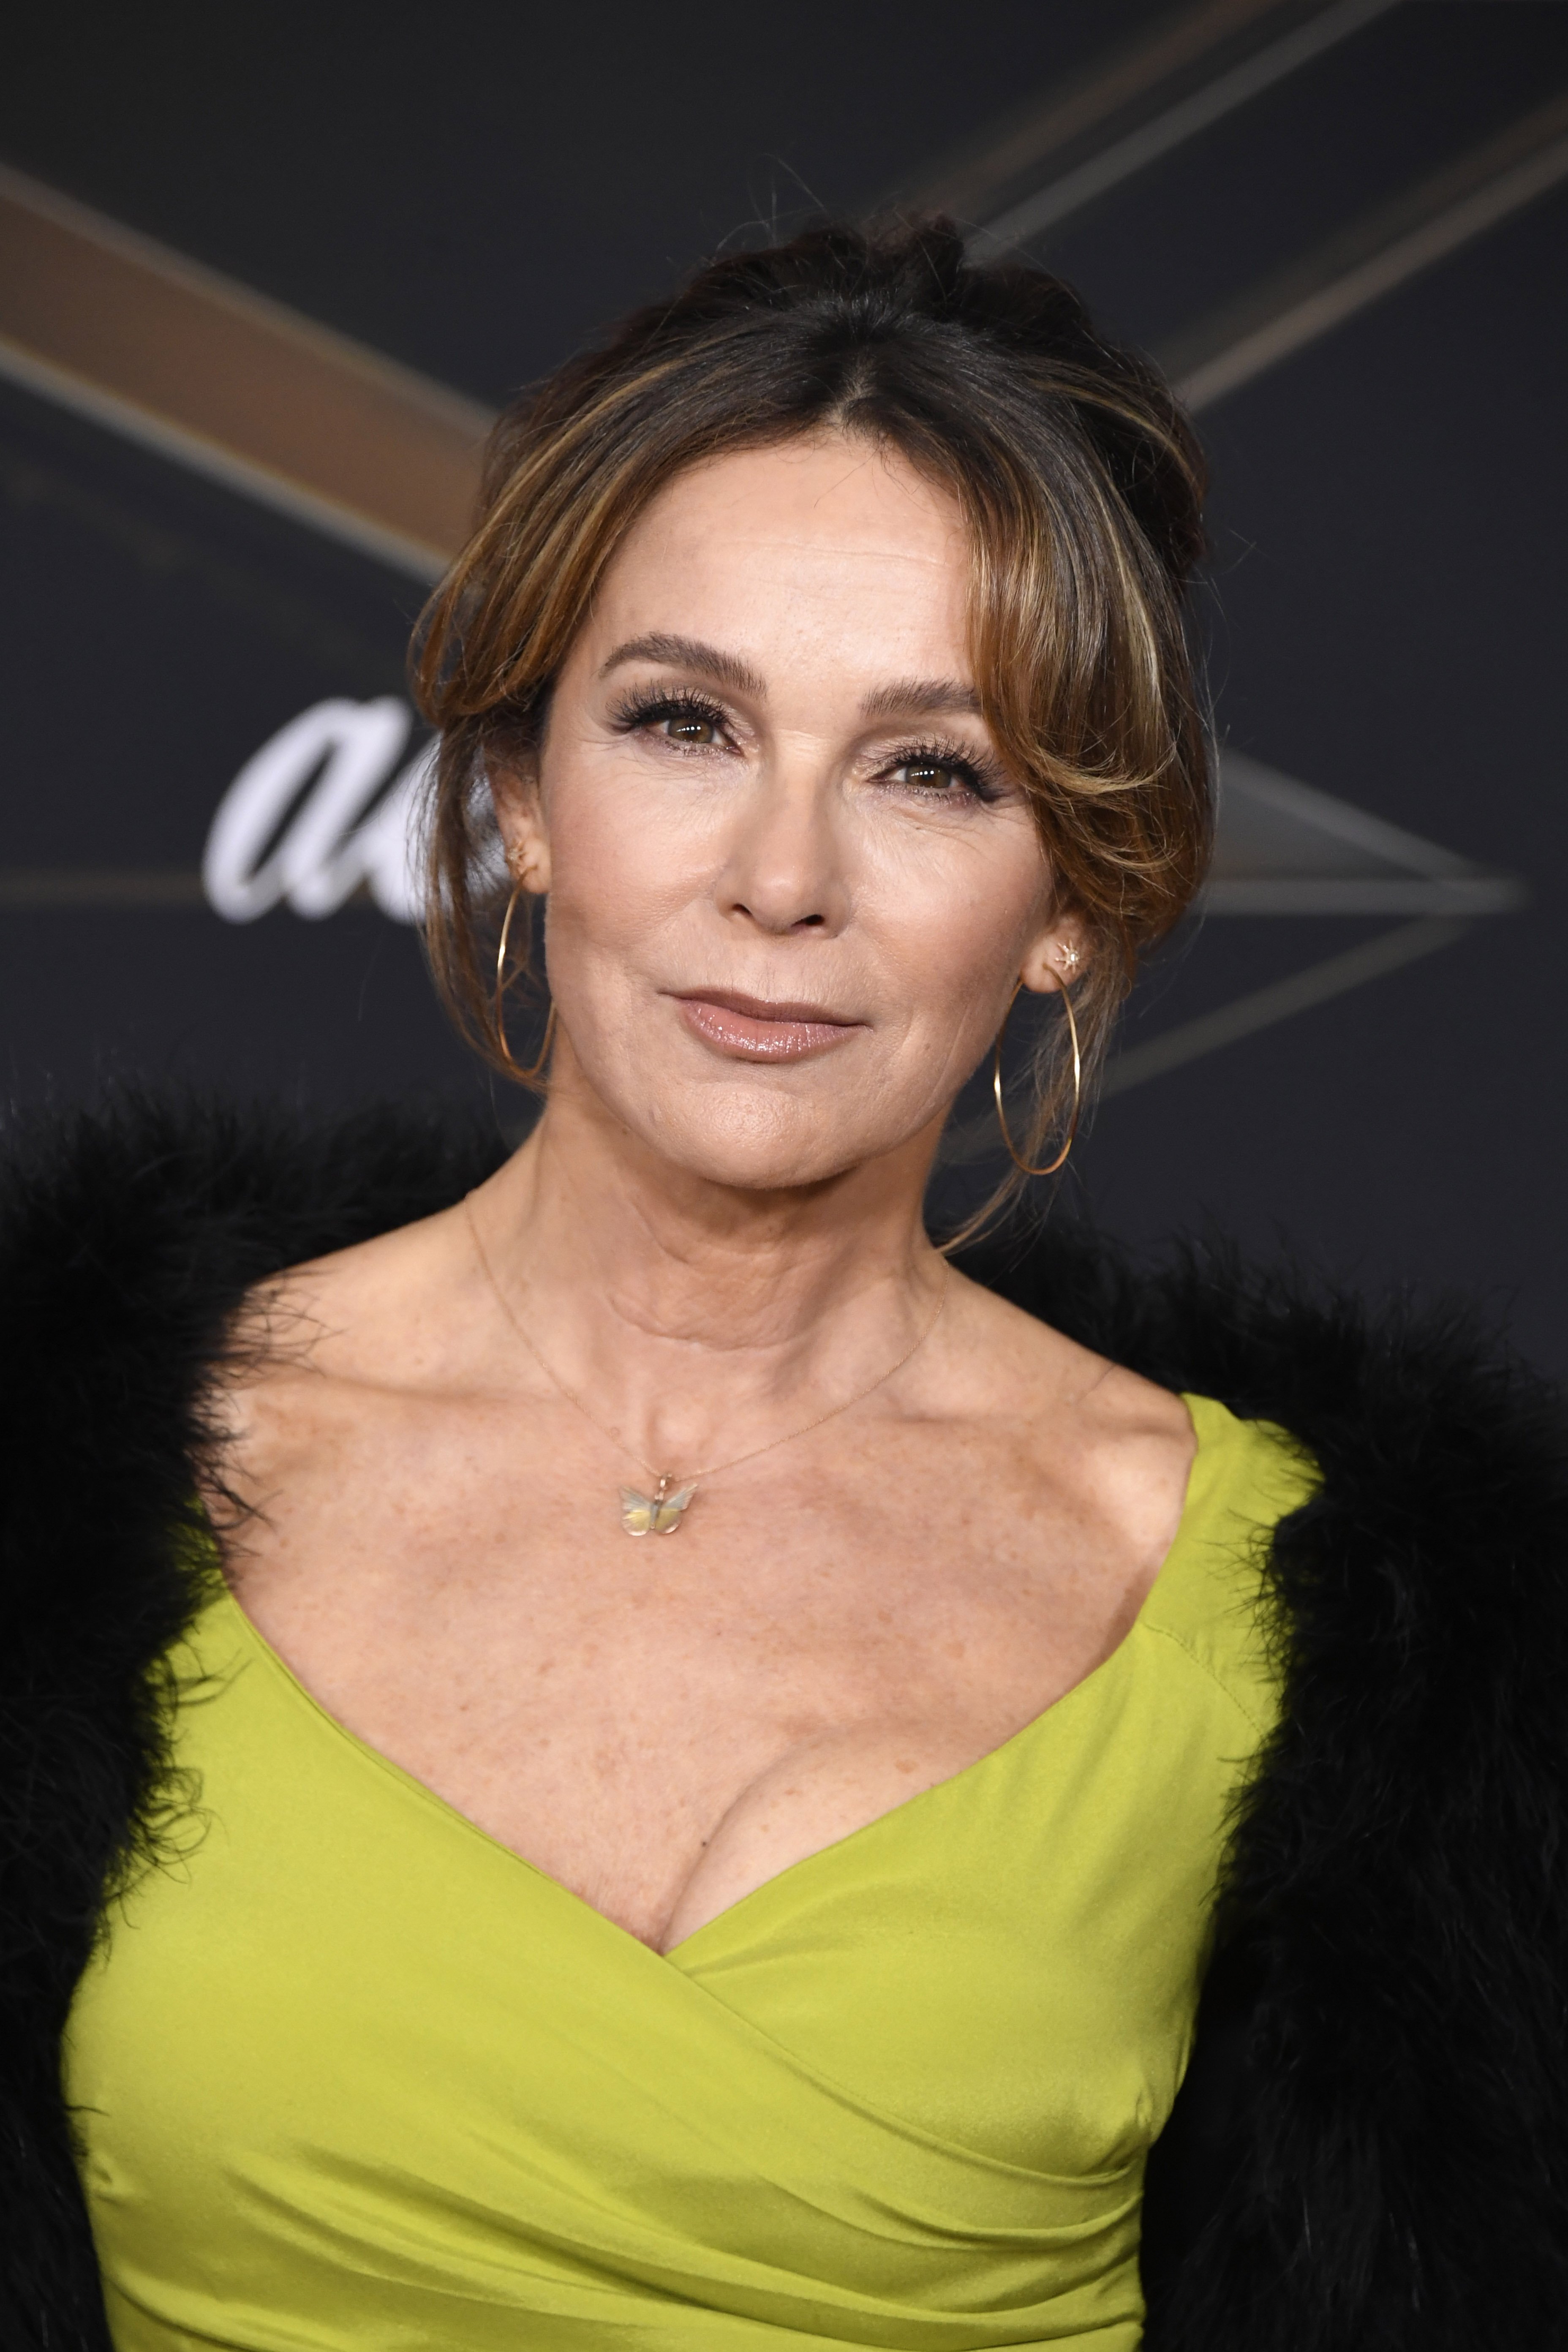 Jennifer Grey at Marvel Studios' "Captain Marvel" premiere on March 04, 2019, in Hollywood, California. | Source: Getty Images